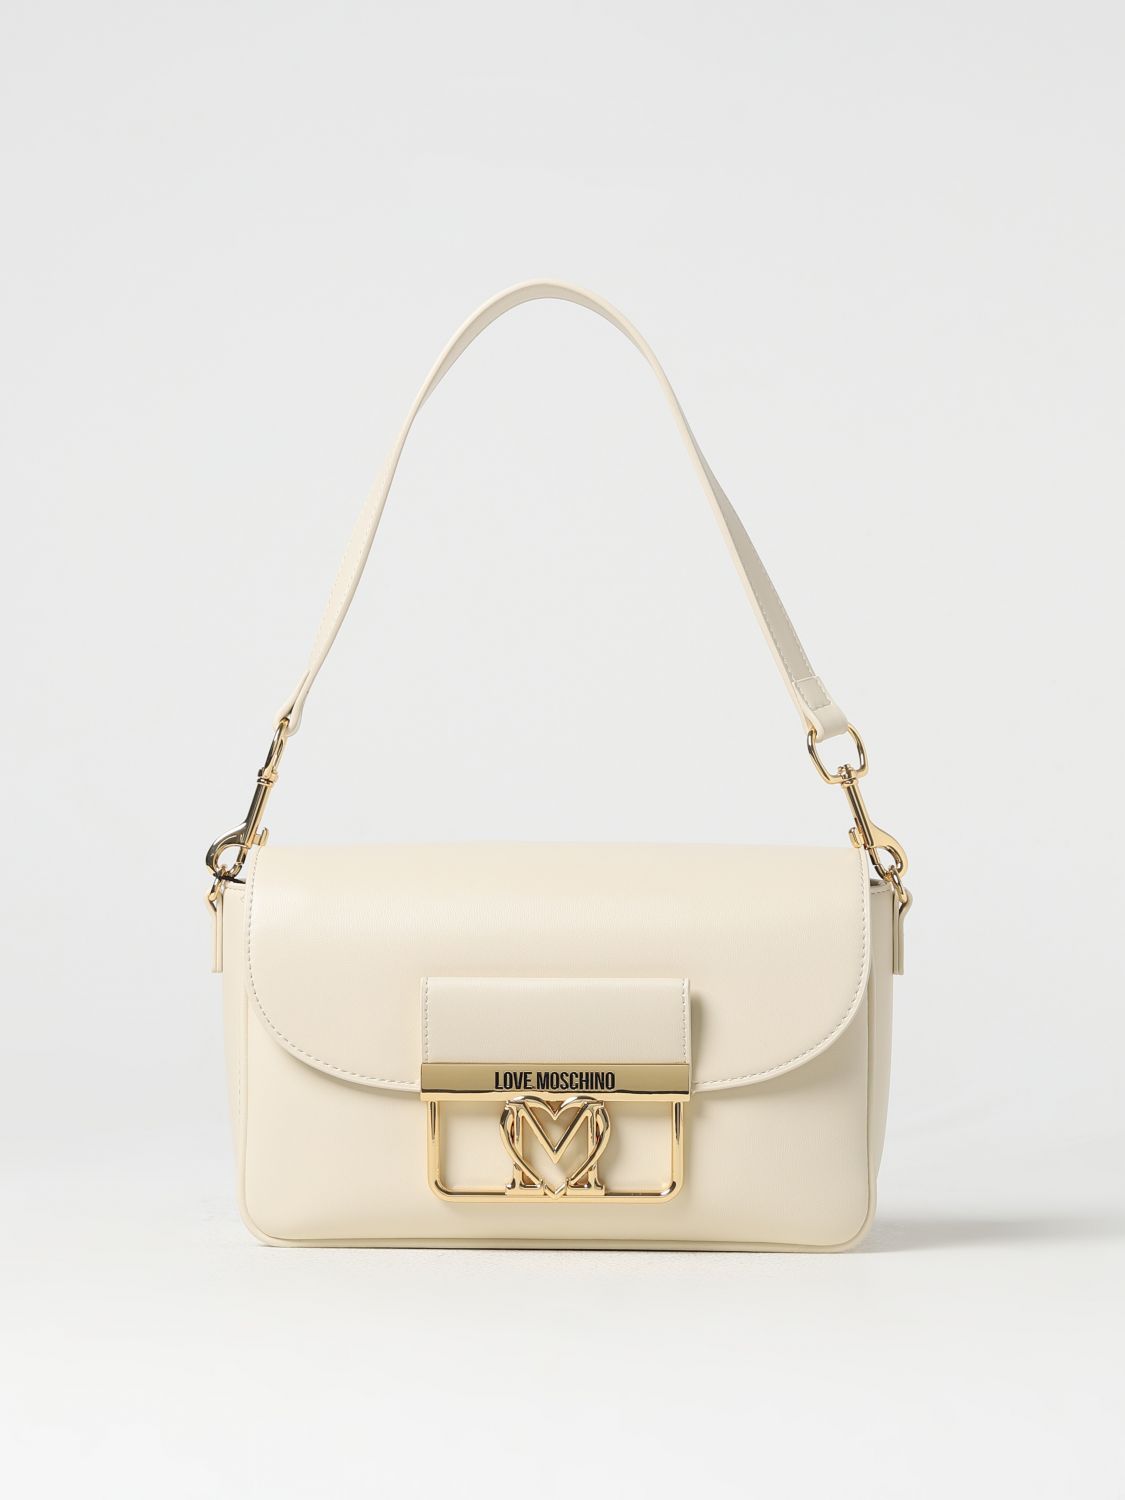 Love Moschino Women's White Ivory Faux Leather Shoulder Bag & Shoulder